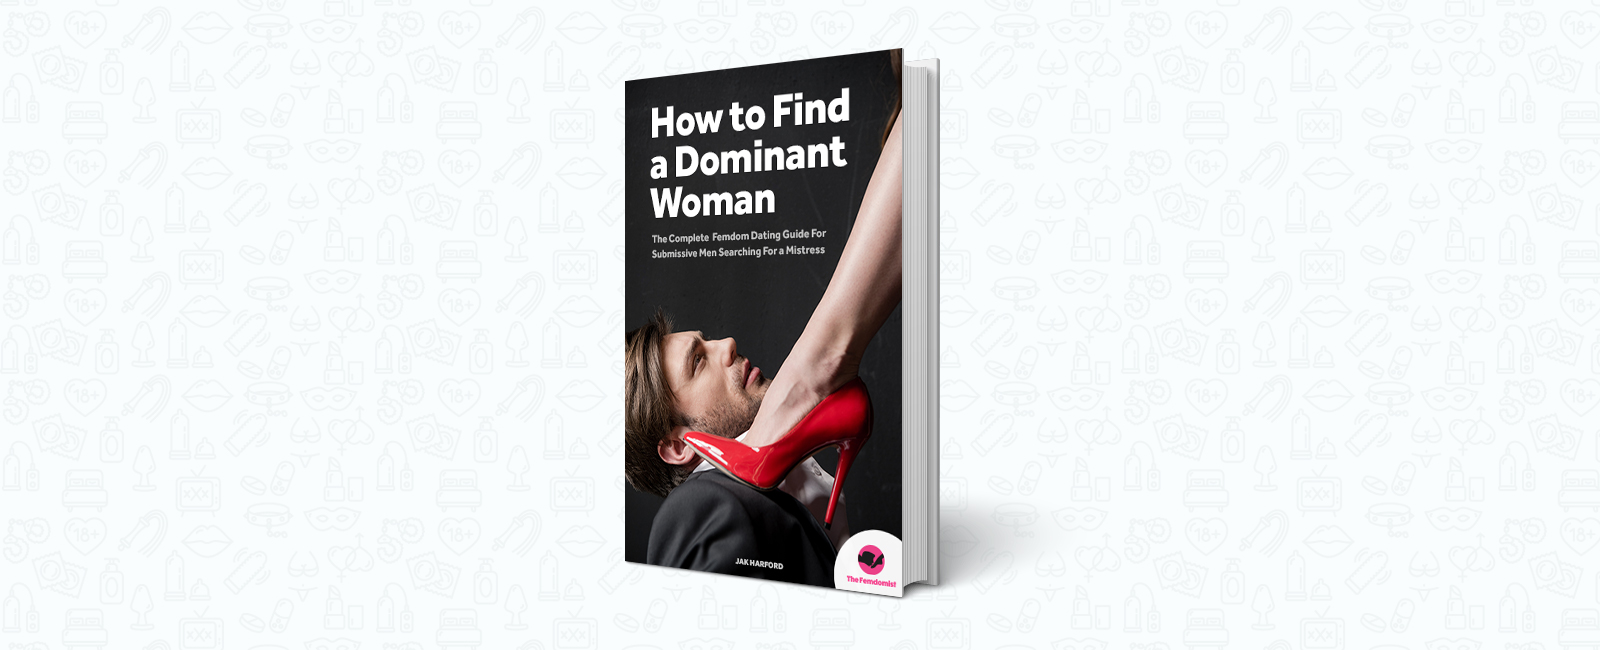 How to Find a Dominant Woman (The Complete Femdom Dating Guide)